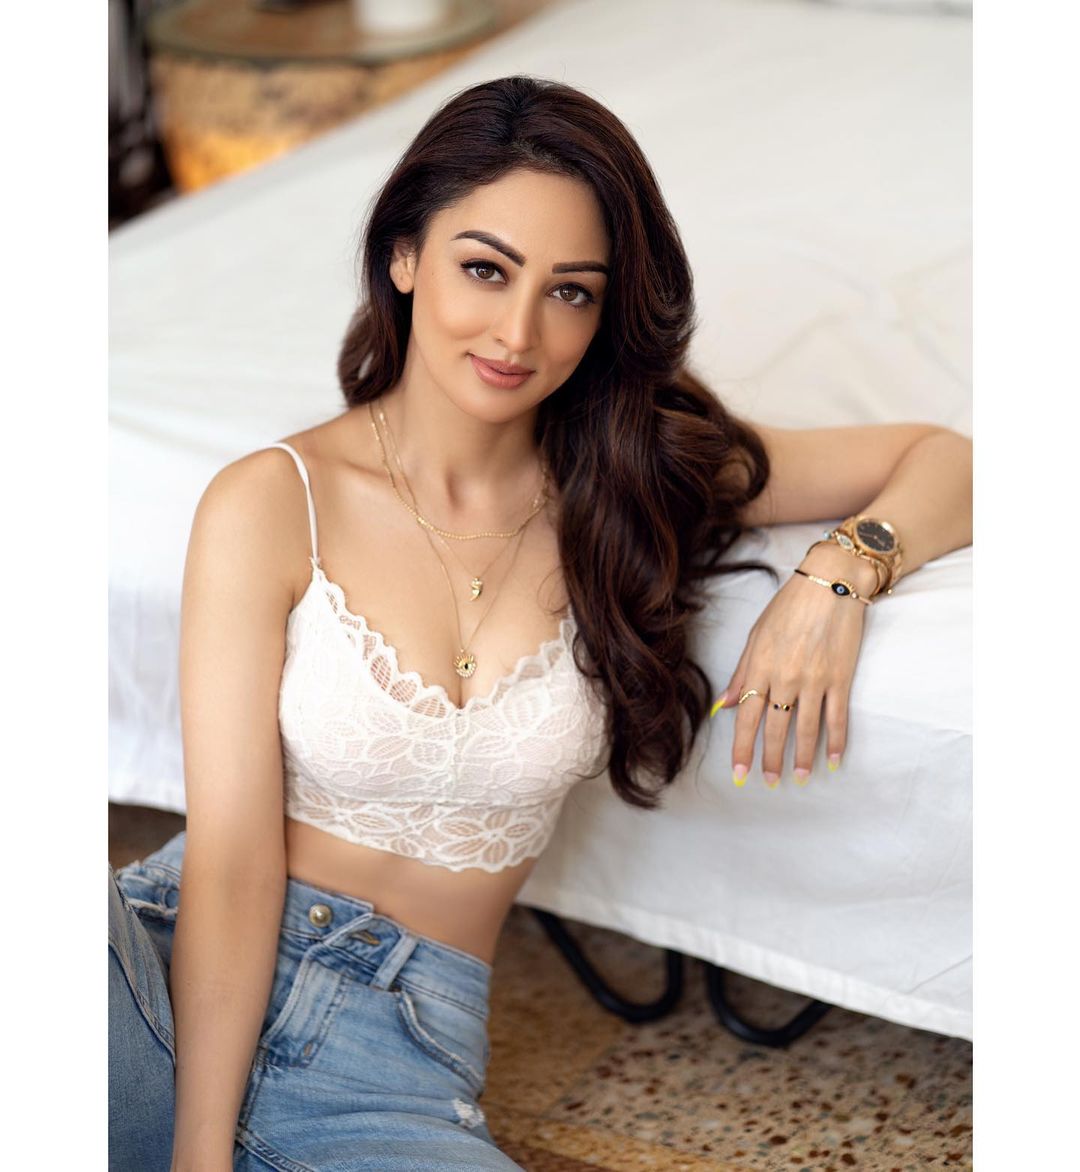 Sandeepa Dhar looks elegant in the white lace bralette with denims.